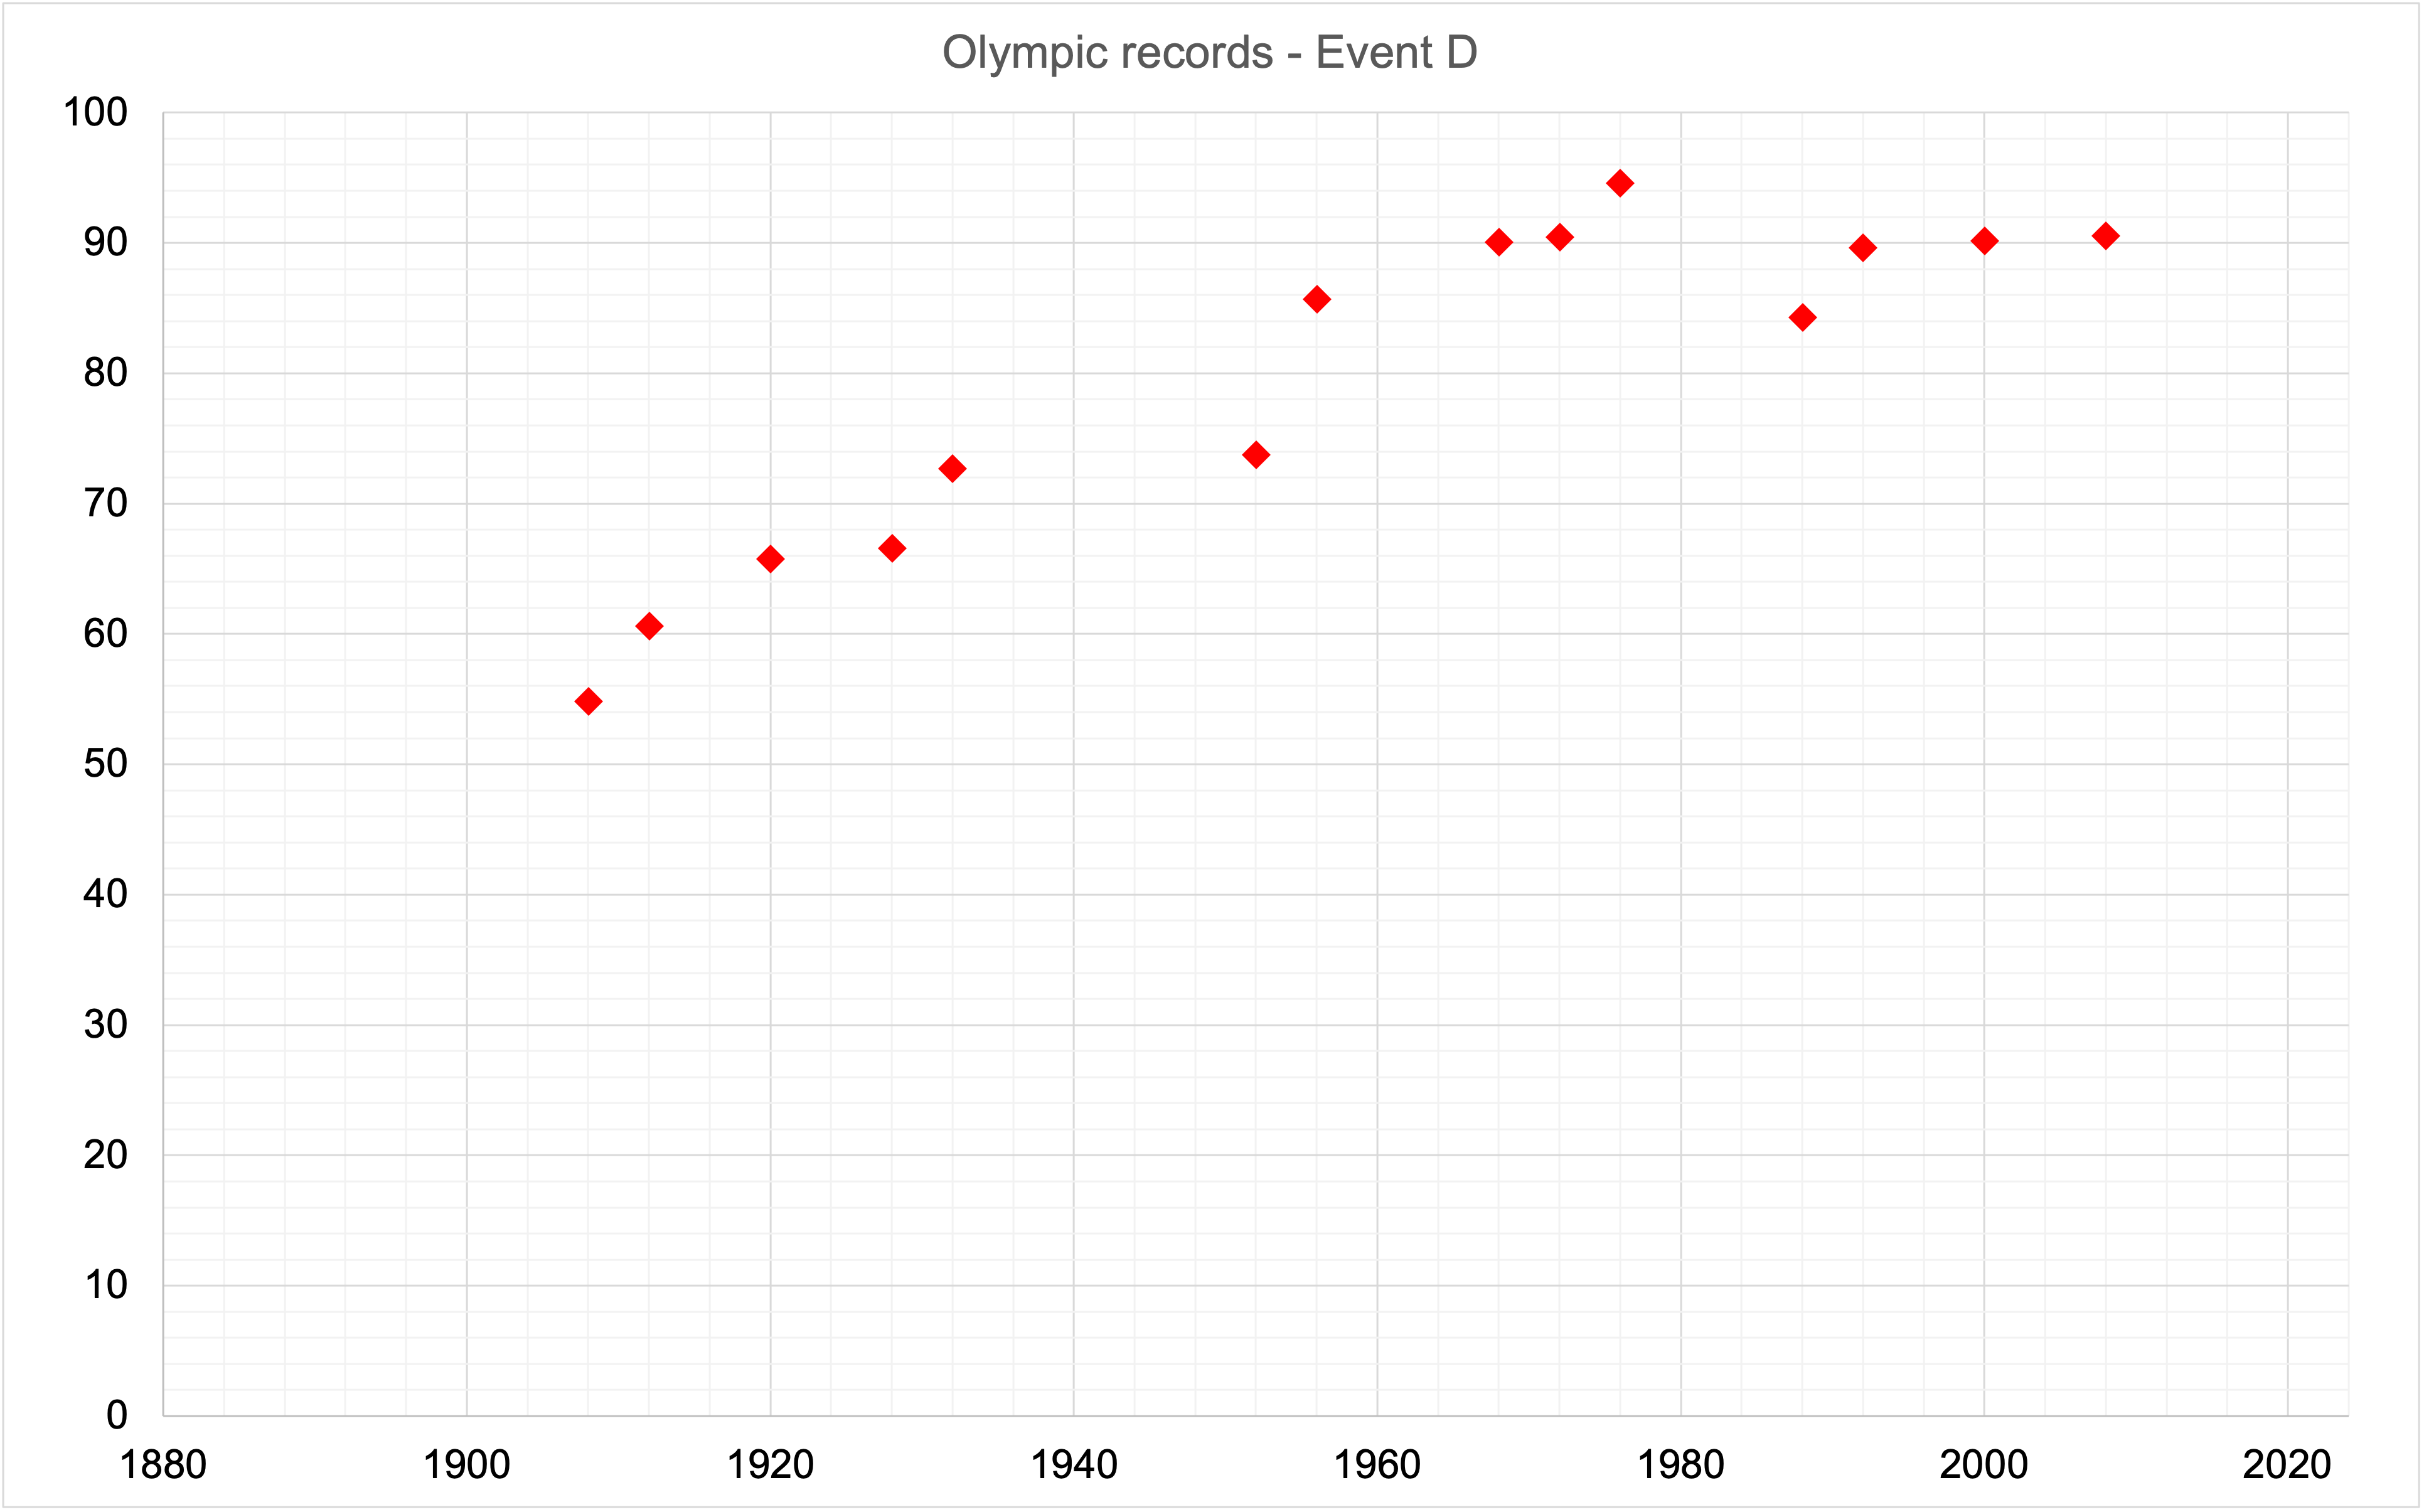 Graph showing Olympic records for Event D